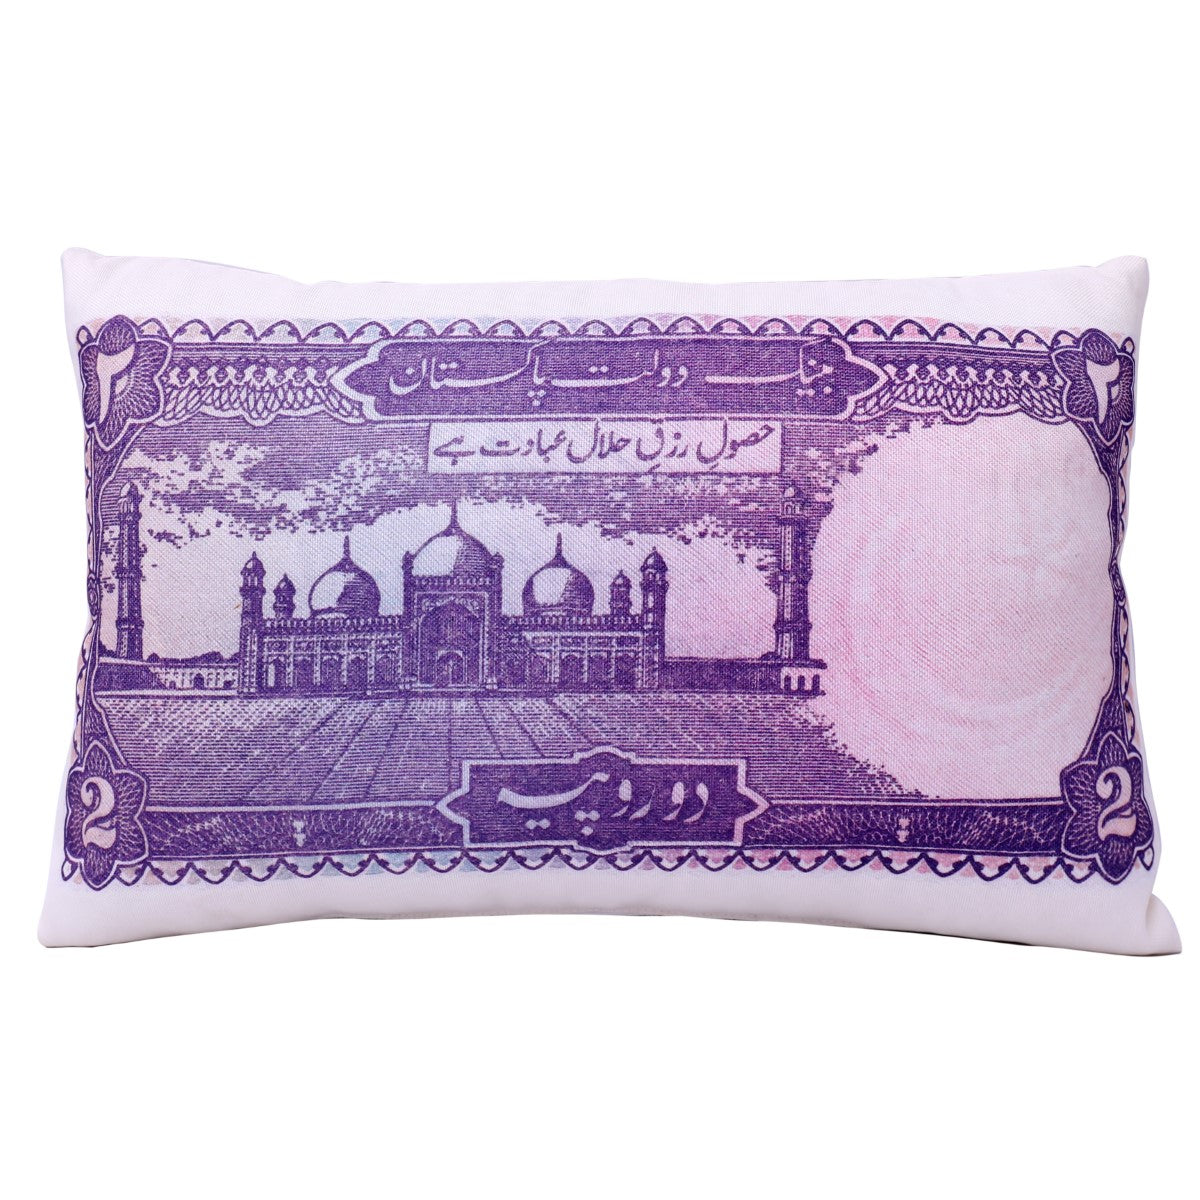 Buy 1 Get One Free - 02 Rupee Cushion Filled 12x18